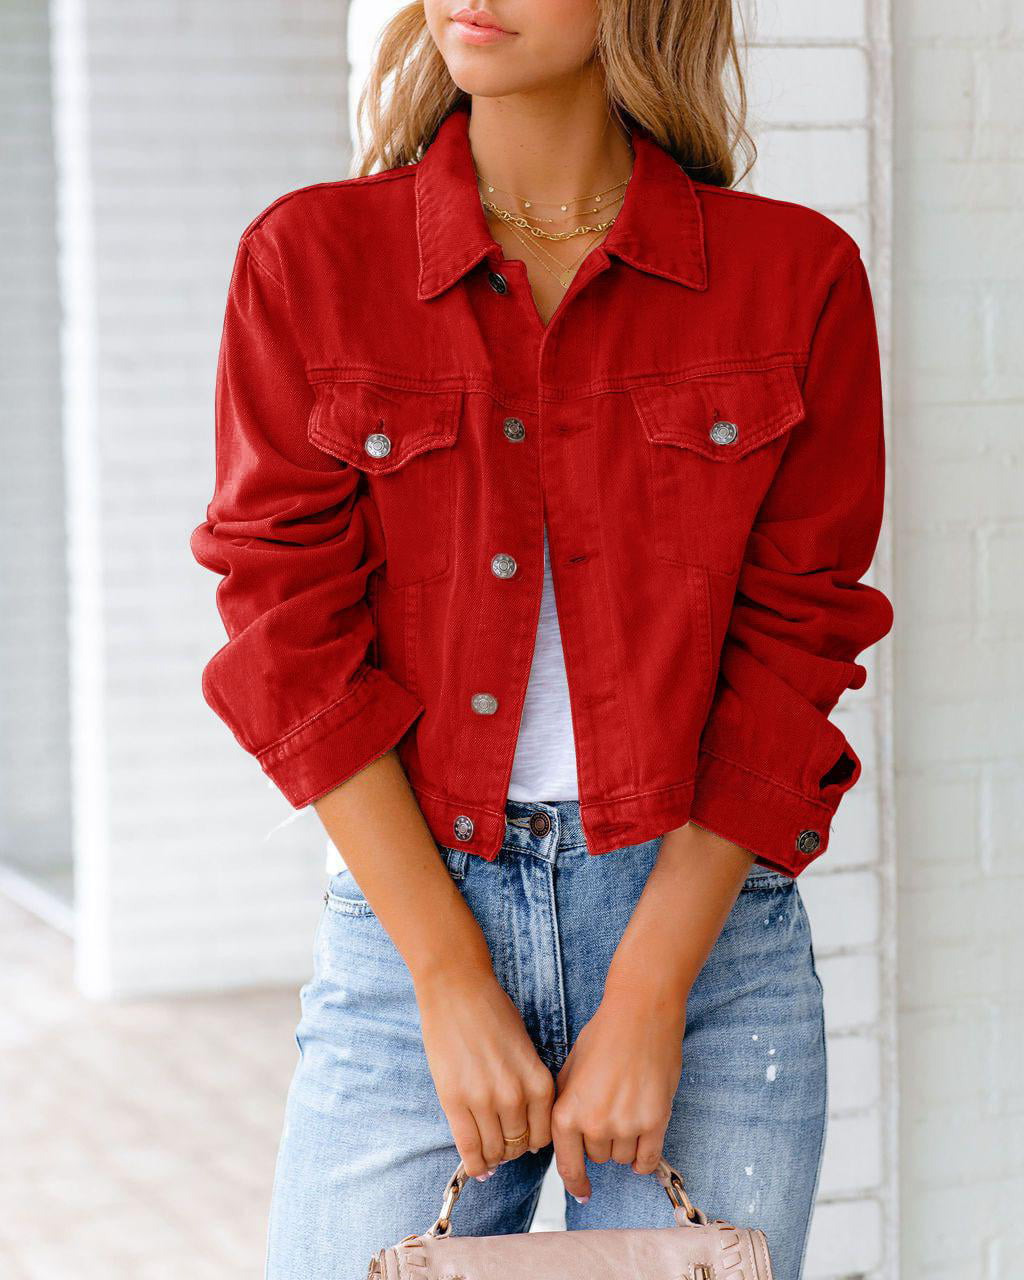 Buy Stylish Denim Jackets for Women Online in India | ONLY